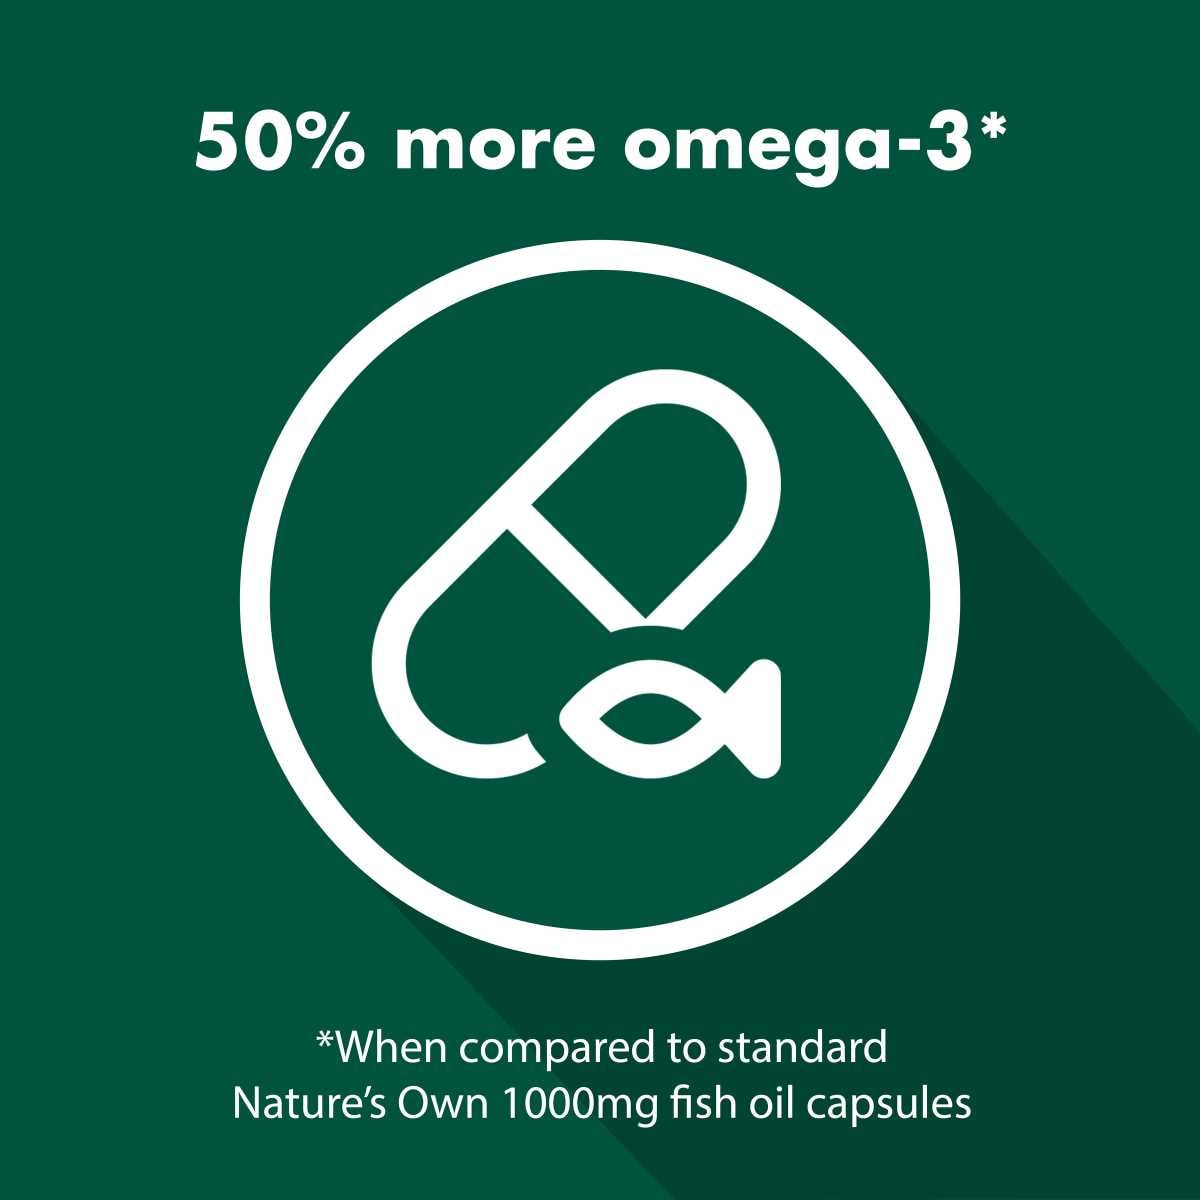 Natures Own Odourless Fish Oil 1500mg 400 Capsules